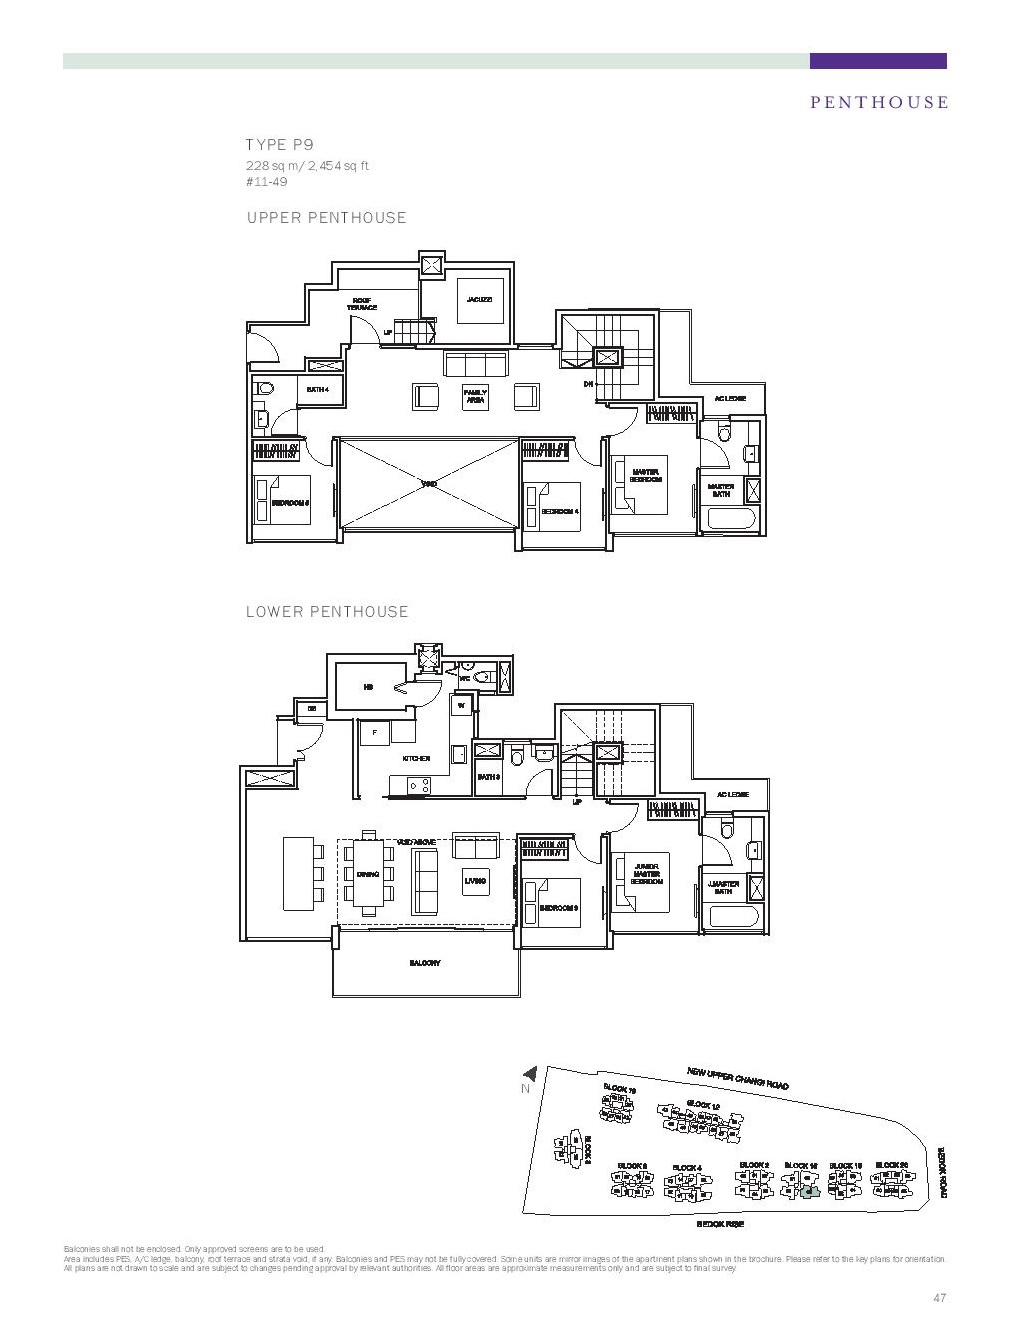 The Glades @ Tanah Merah 5 Bedroom Penthouse Type P9 Plans